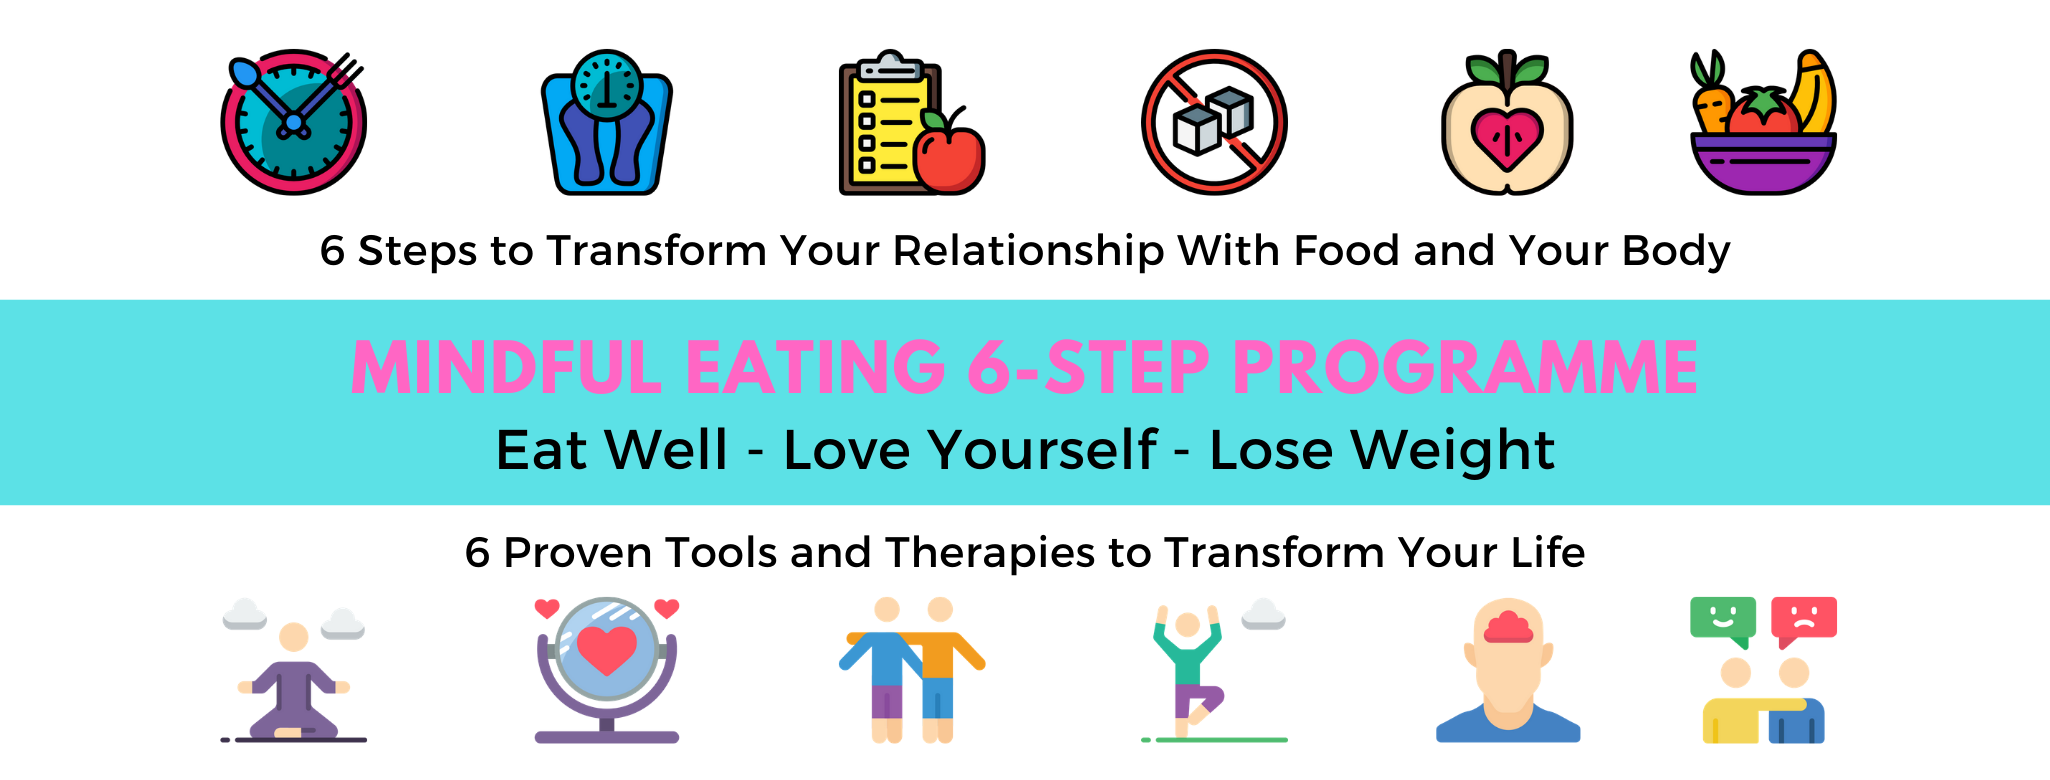 Mindful Eating 6-Step Programme - steps and therapies